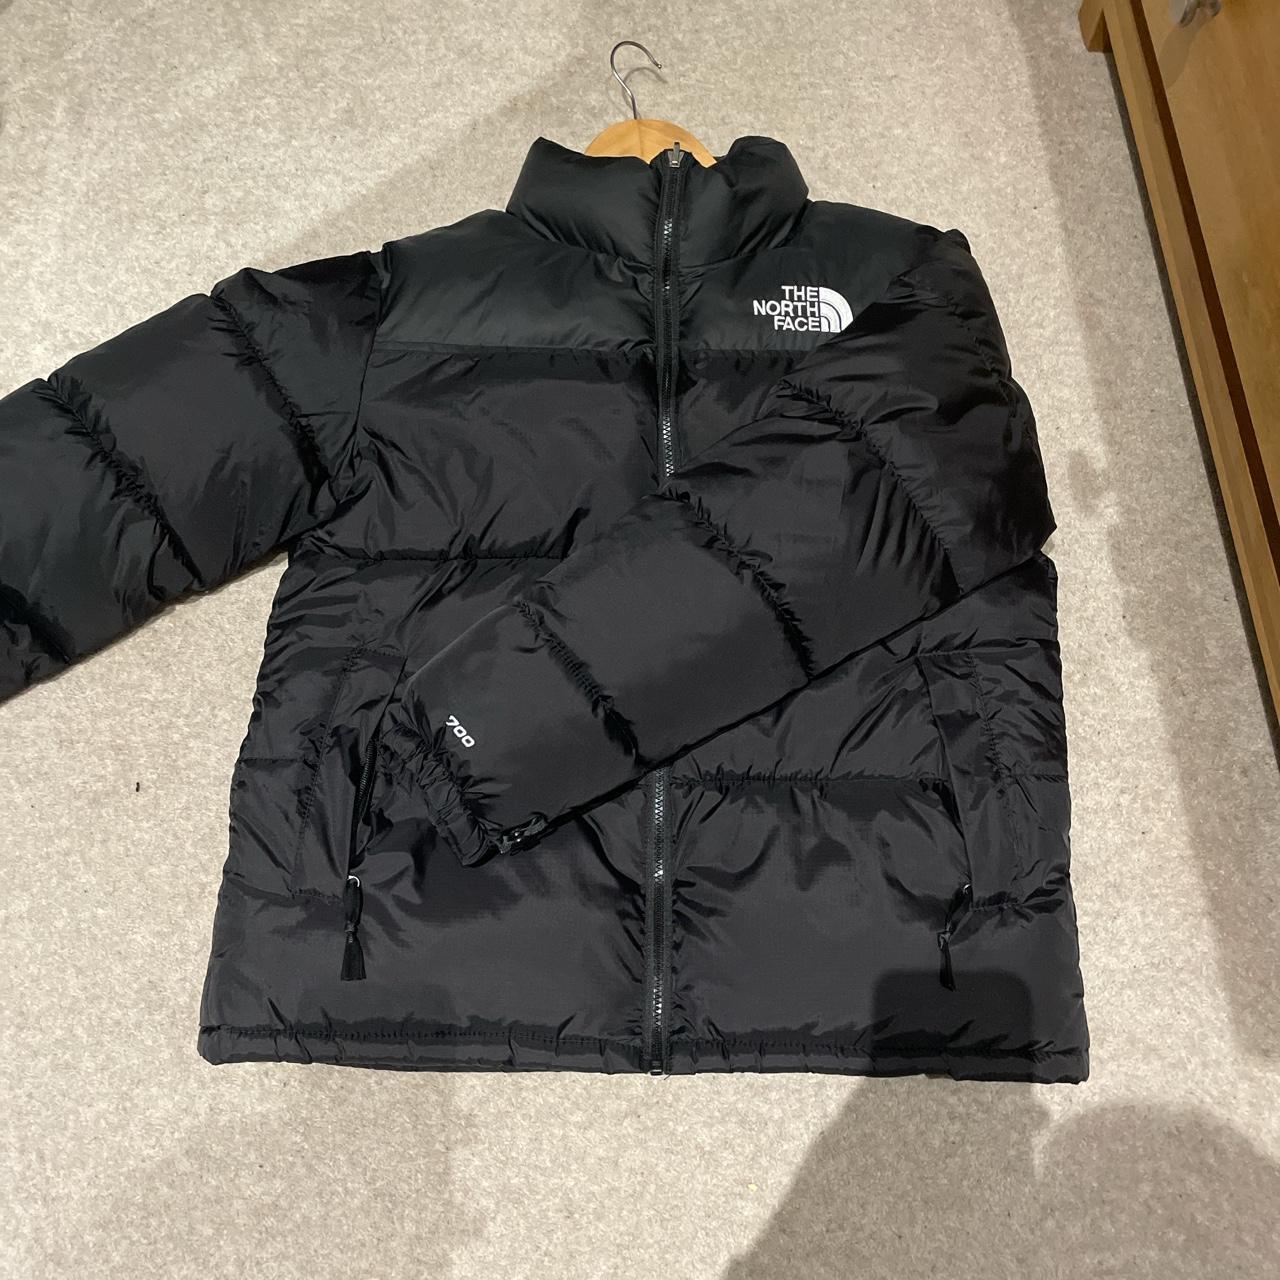 North Face nuptse 700 Brand new, Never worn, with tags - Depop